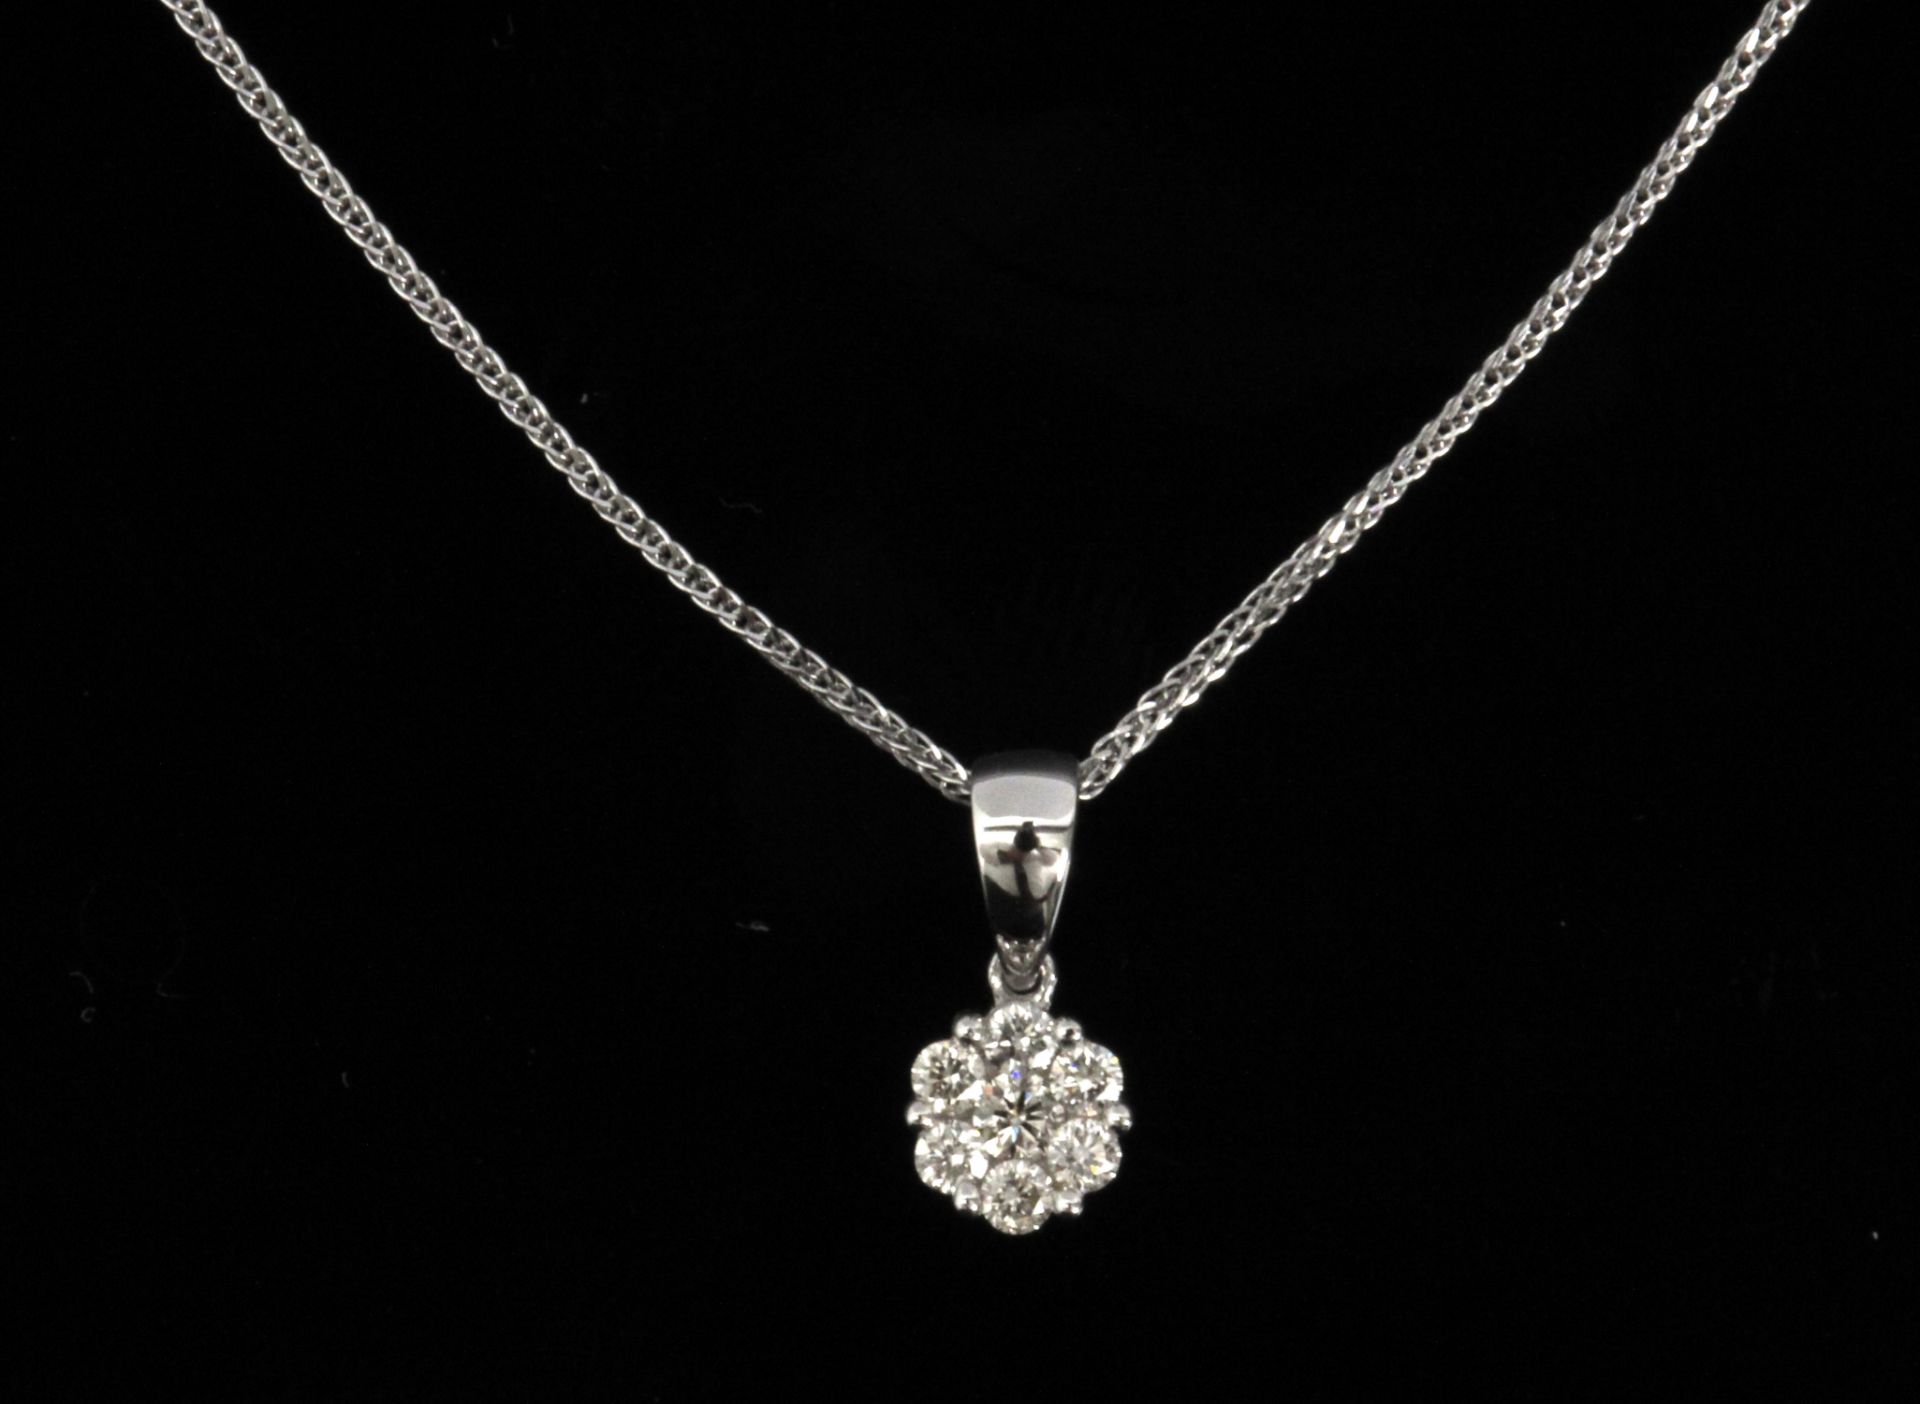 A diamond cluster pendant in an 18k white gold setting